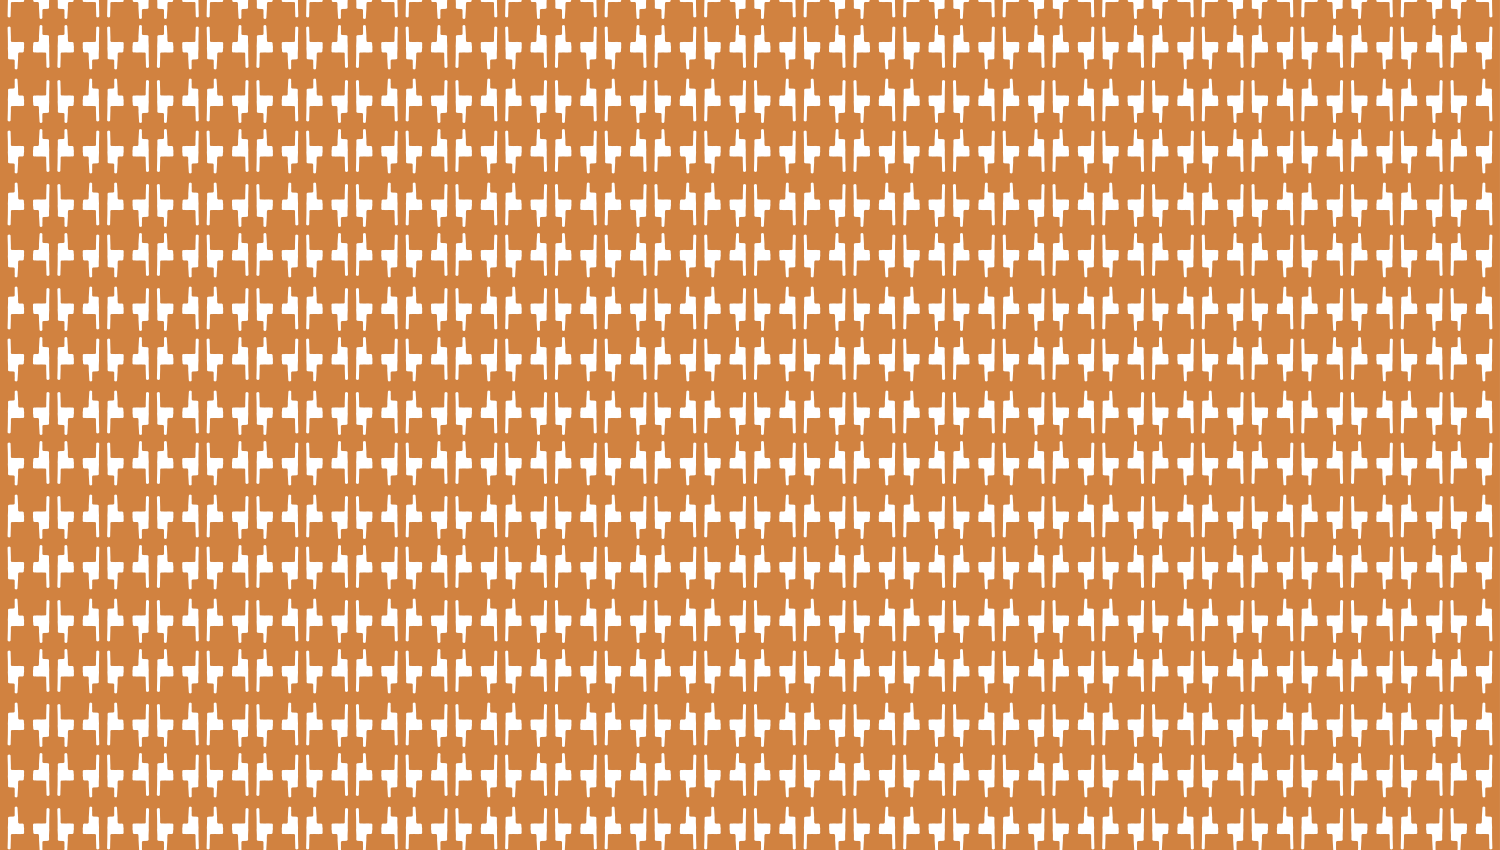 Parasoleil™ Las Palmas© pattern displayed with a ochre color overlay